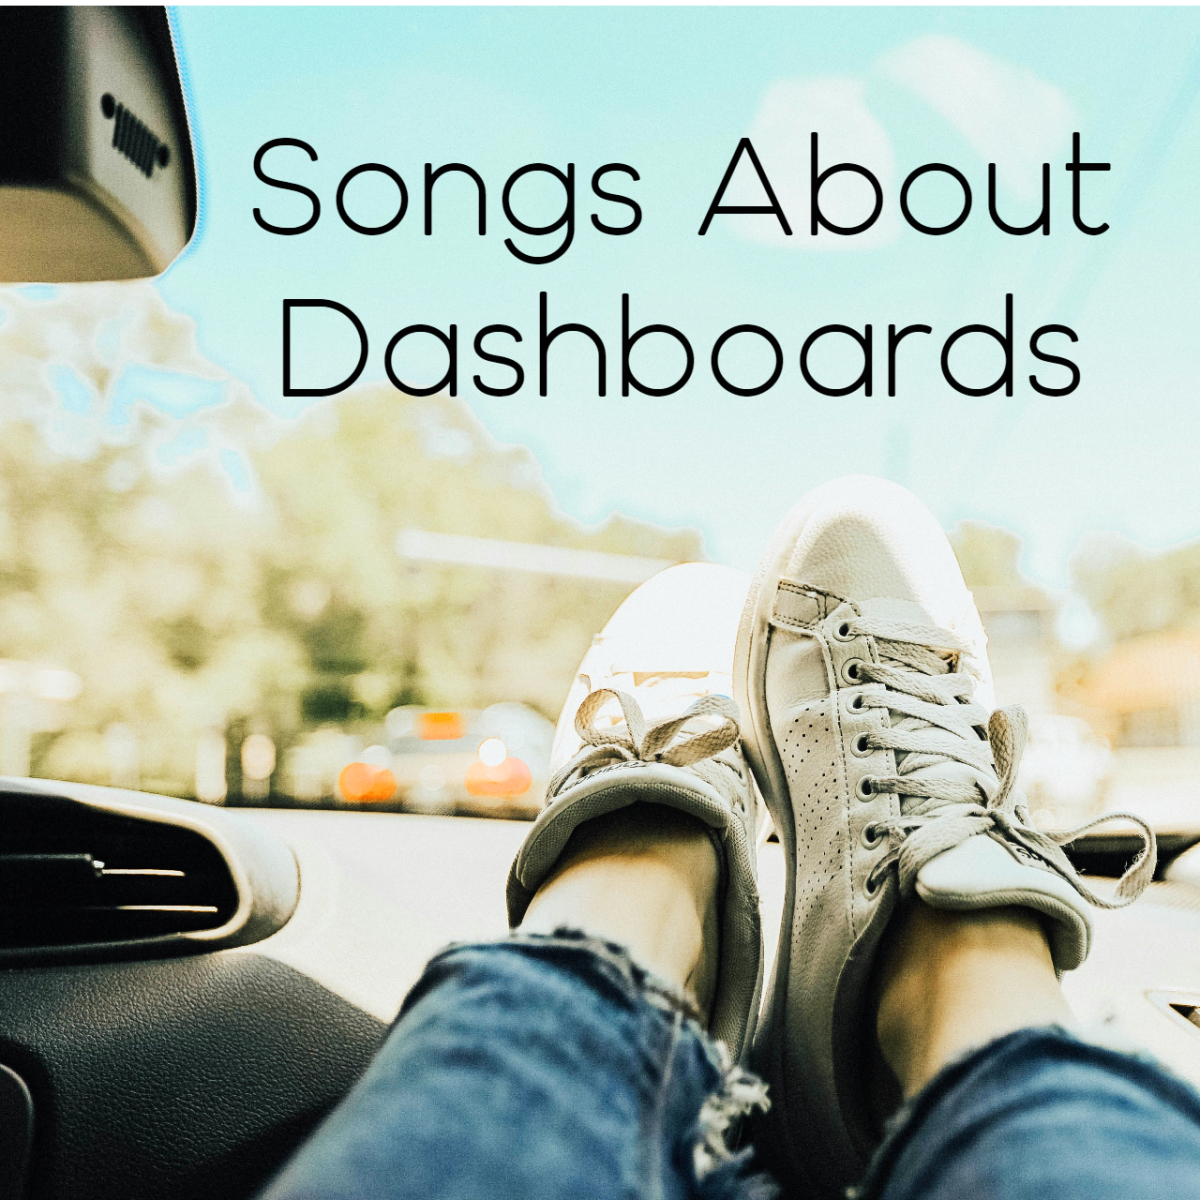 61 Songs That Mention Dashboards